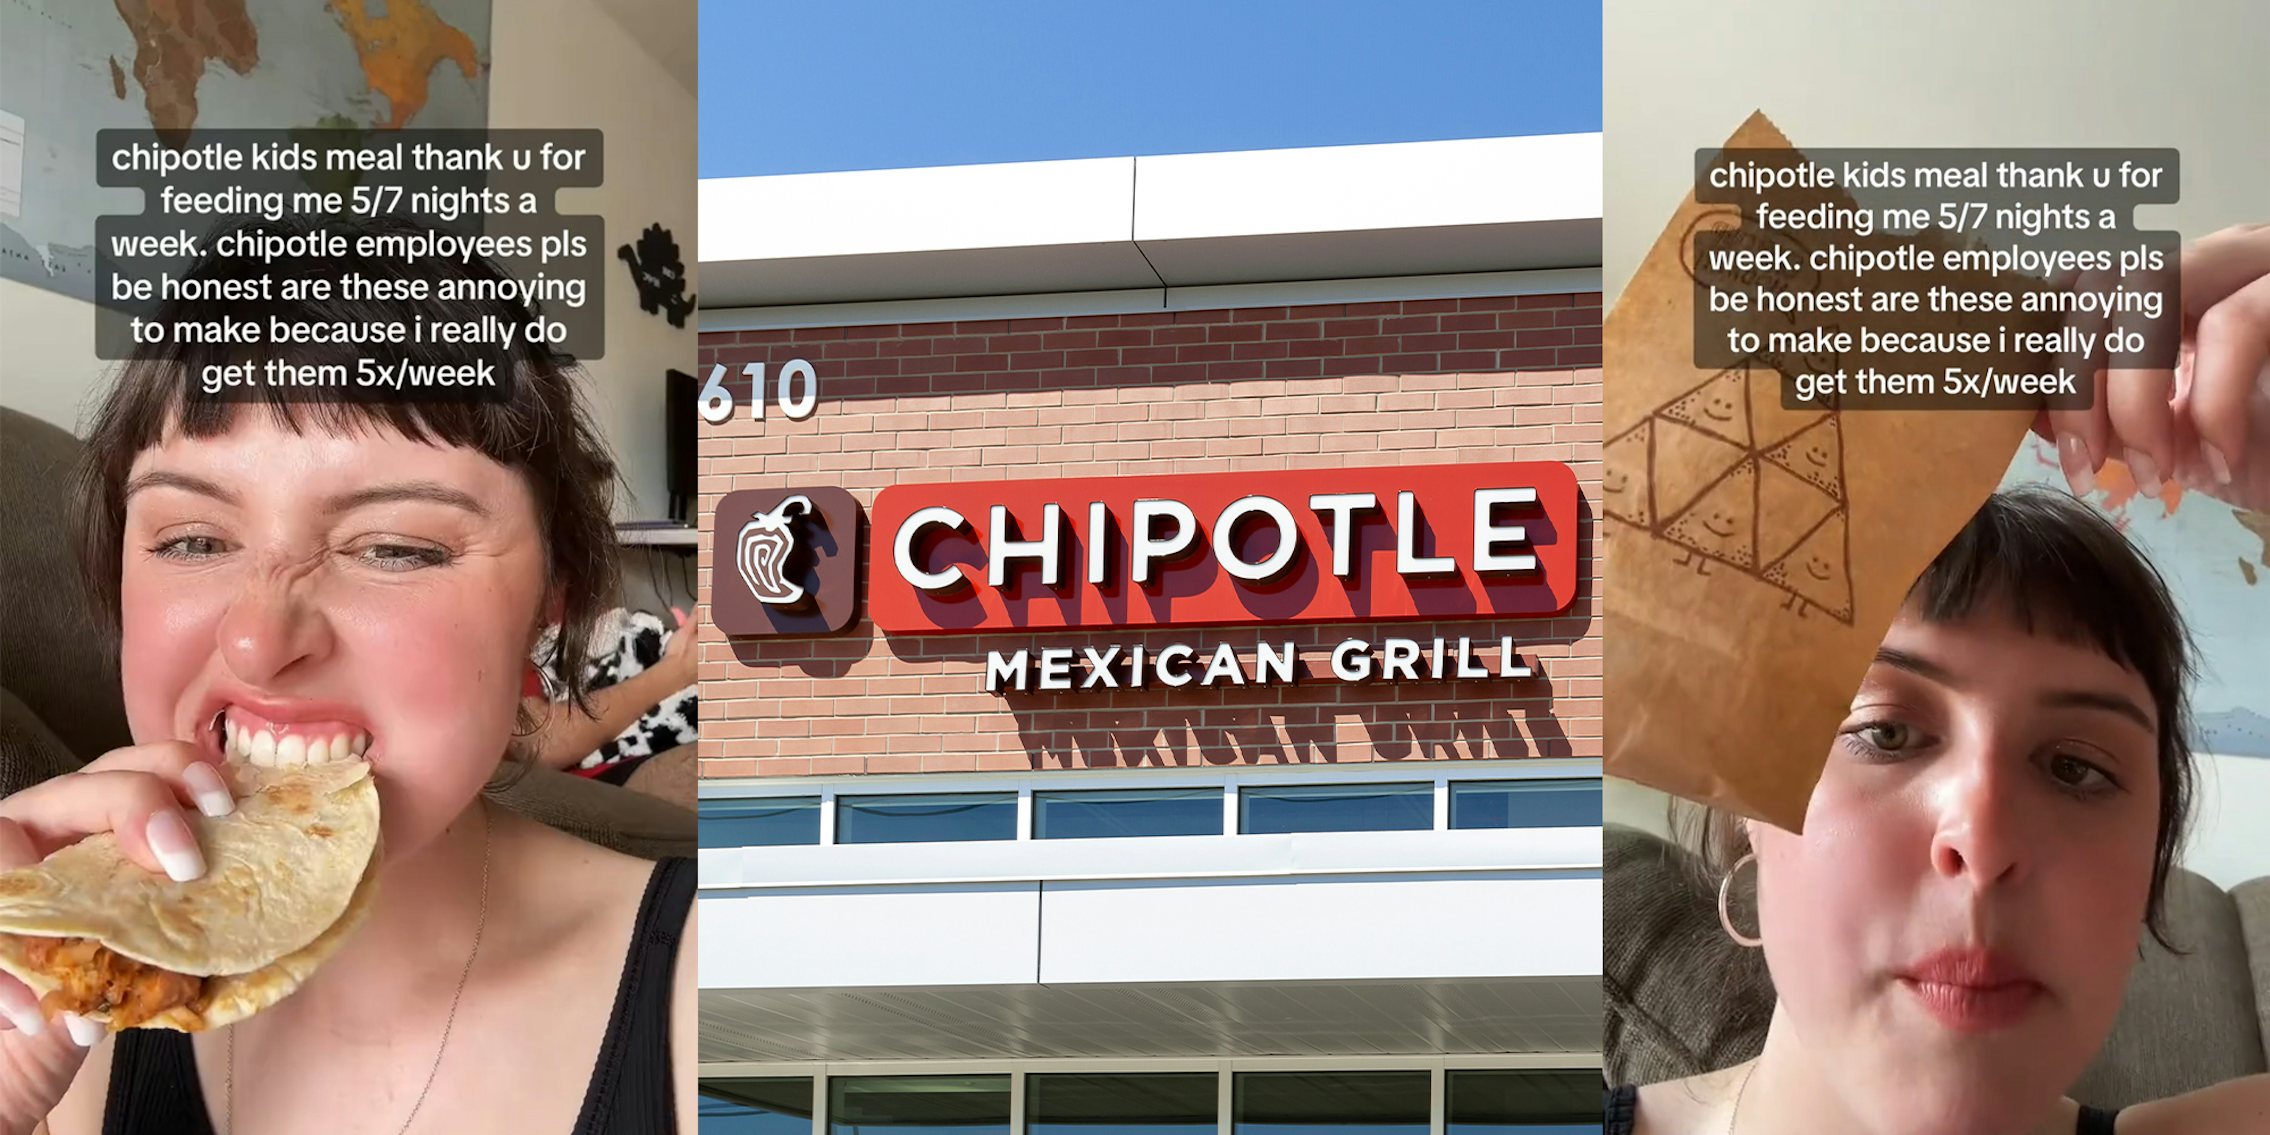 Woman eats chipotle kids meal every night